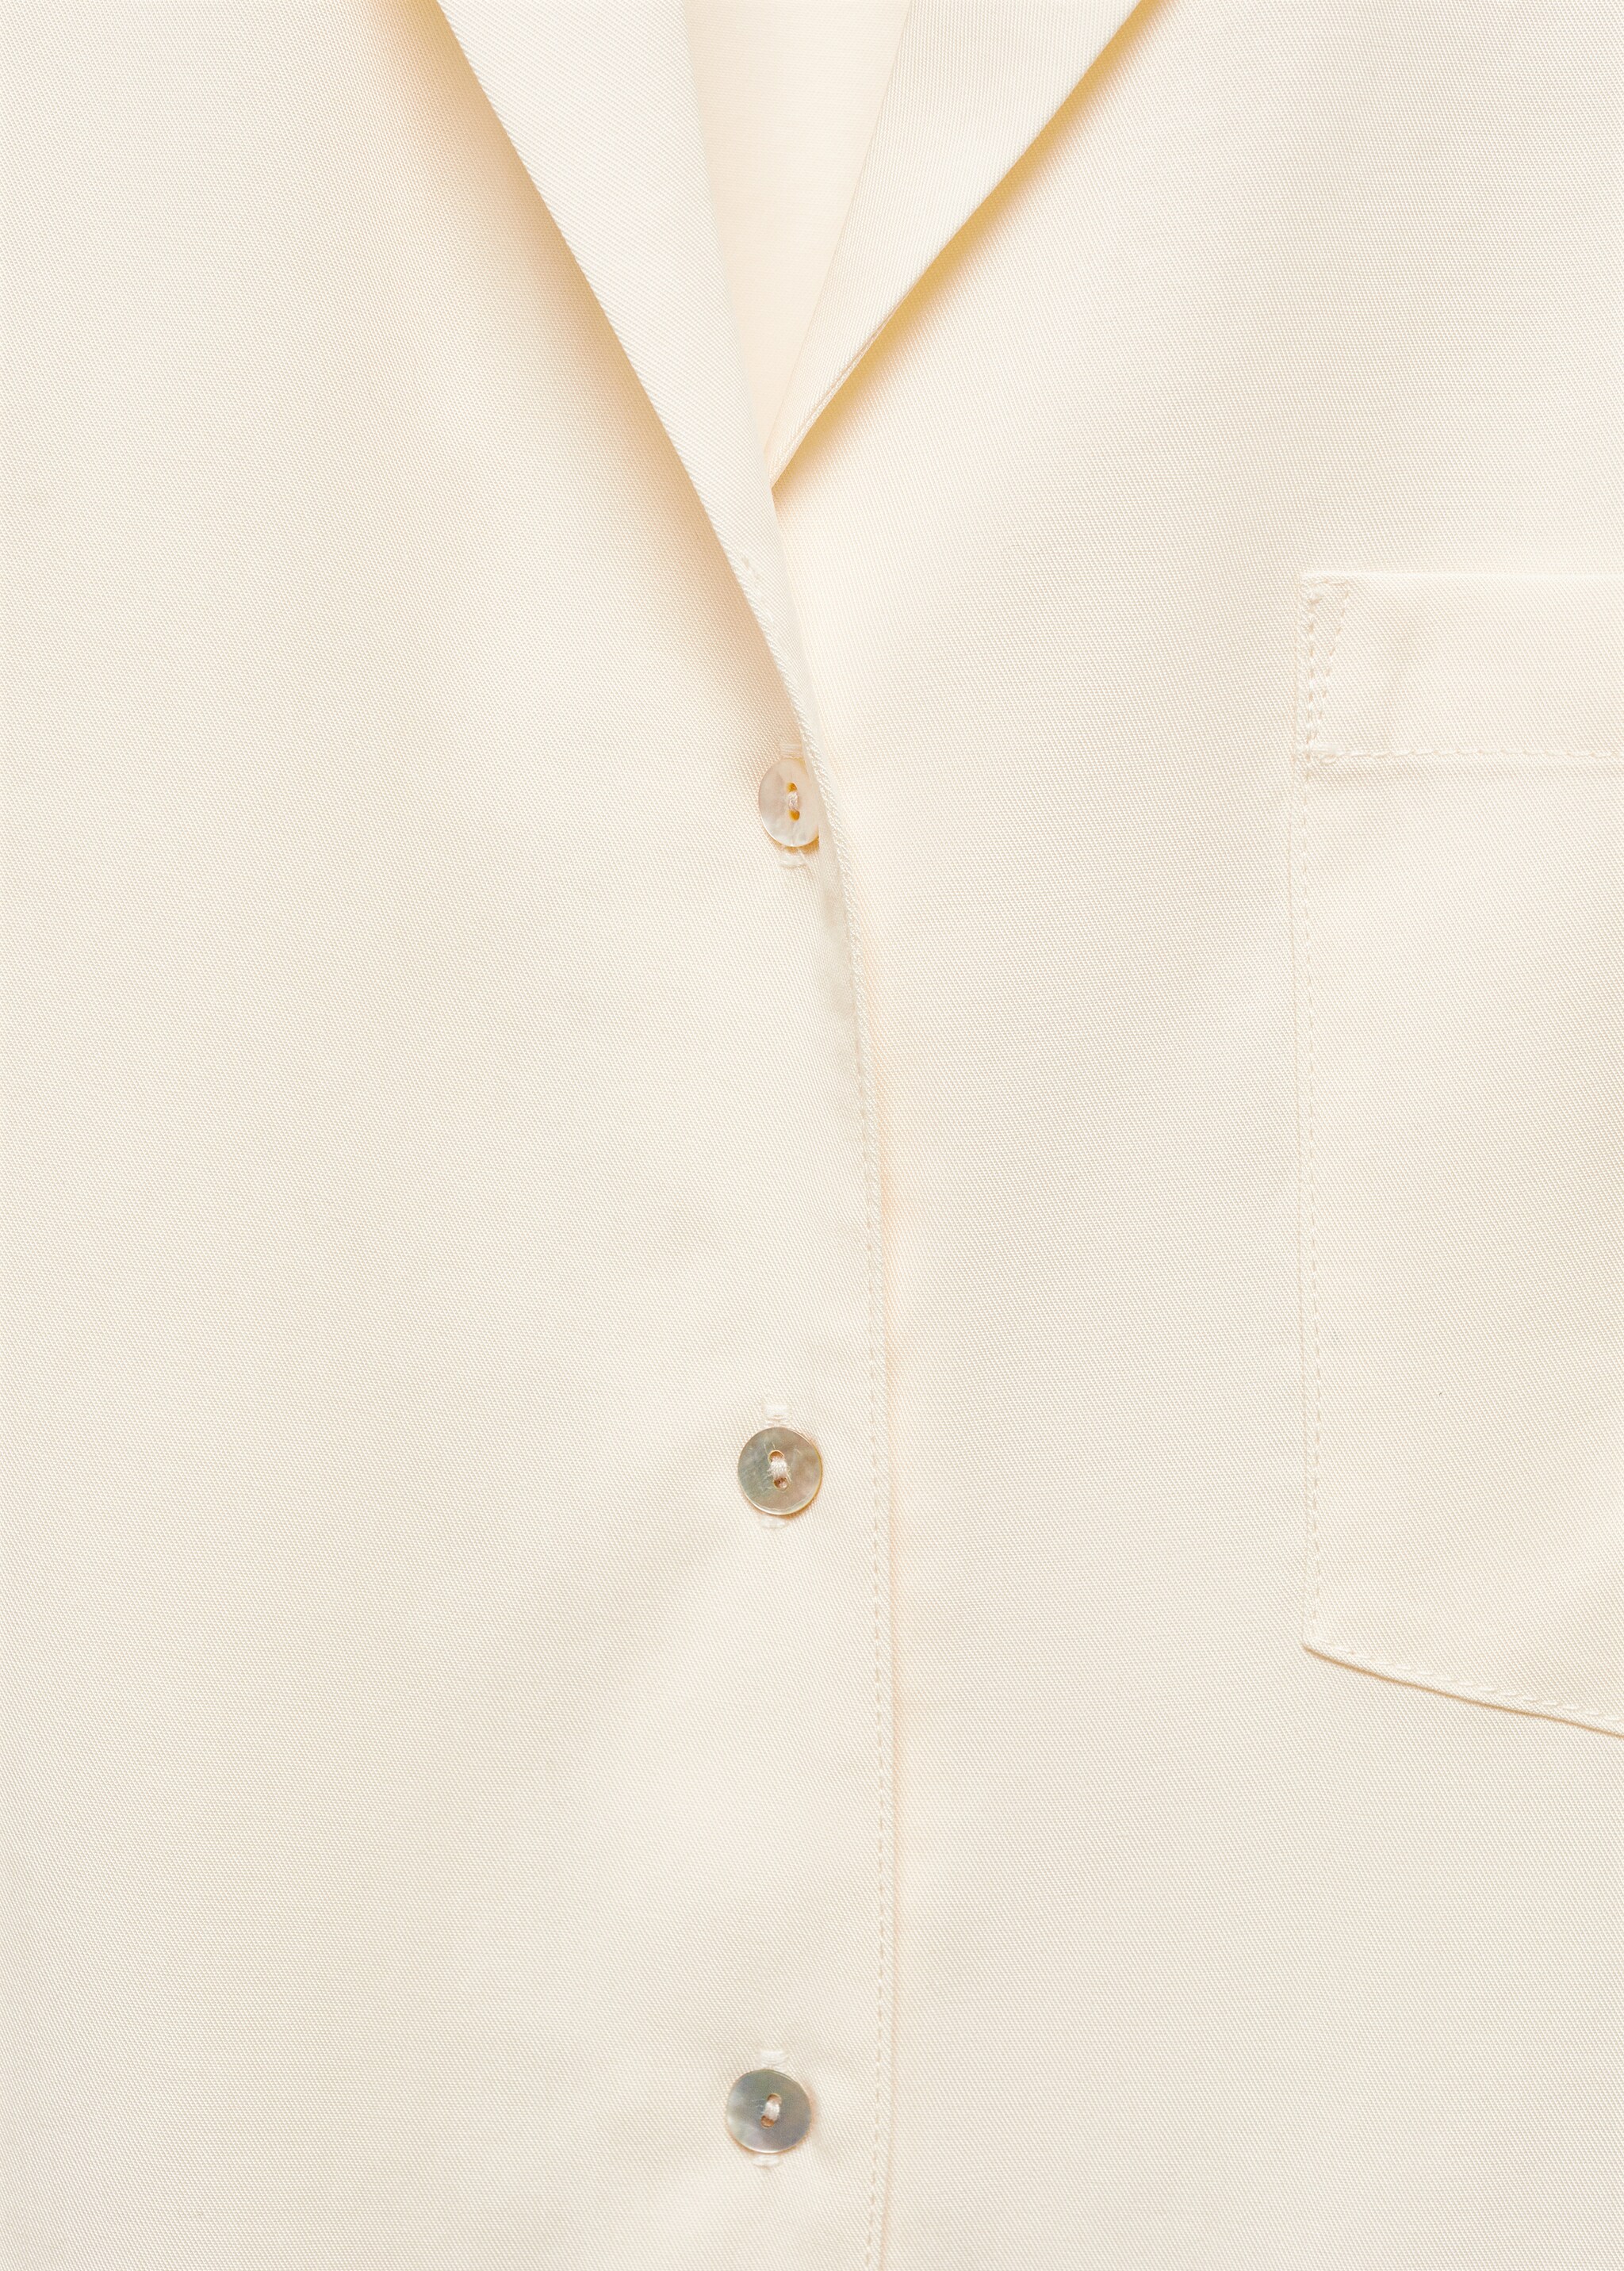 100% lyocell shirt - Details of the article 8